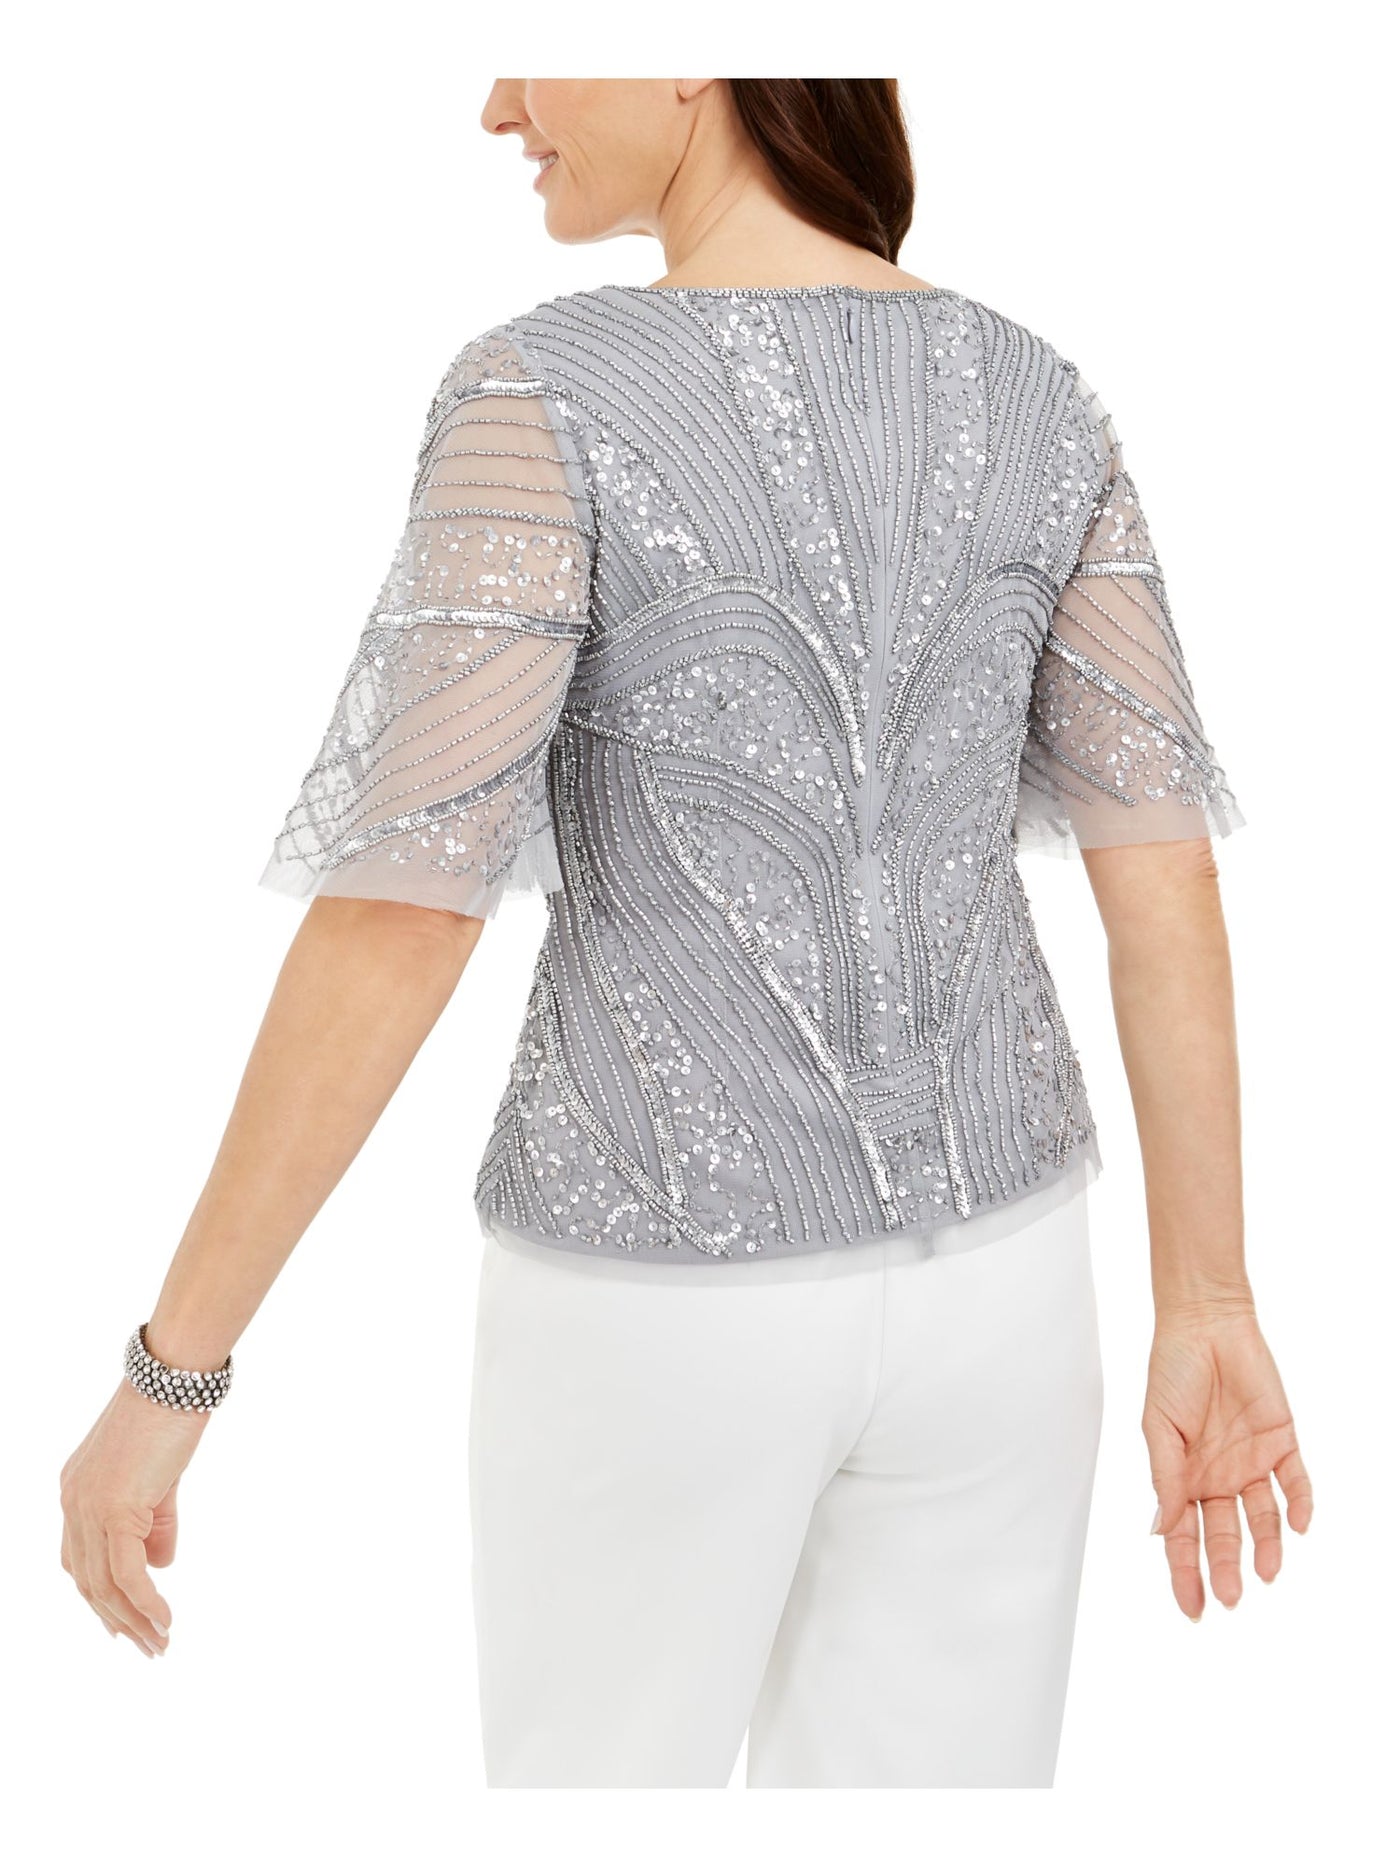 ADRIANNA PAPELL Womens Silver Stretch Sequined Beaded Flutter Sleeve V Neck Evening Top Petites 6P